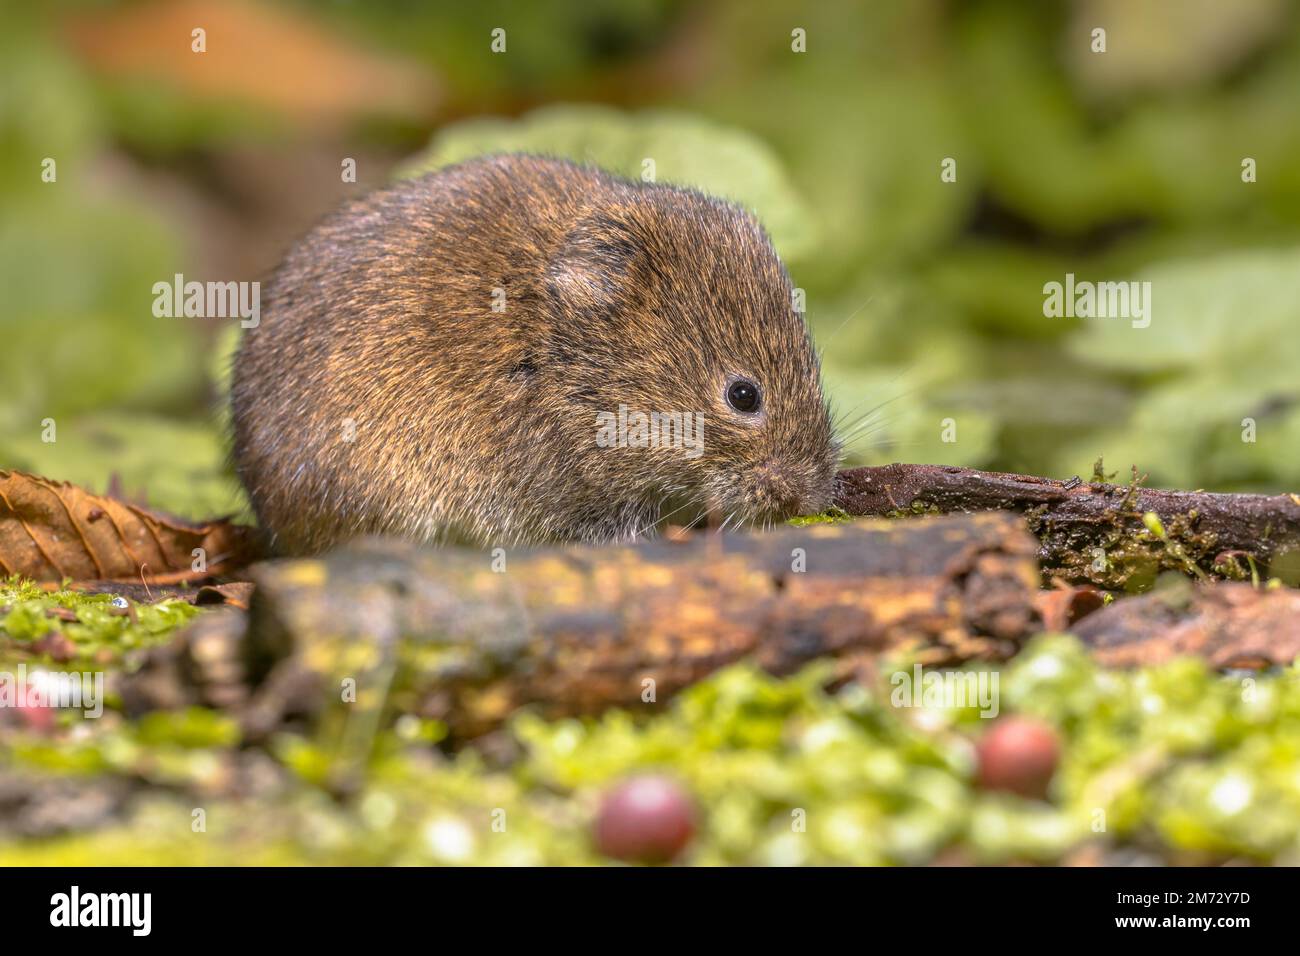 https://c8.alamy.com/comp/2M72Y7D/field-vole-or-short-tailed-vole-microtus-agrestis-walking-in-natural-habitat-green-forest-environment-2M72Y7D.jpg